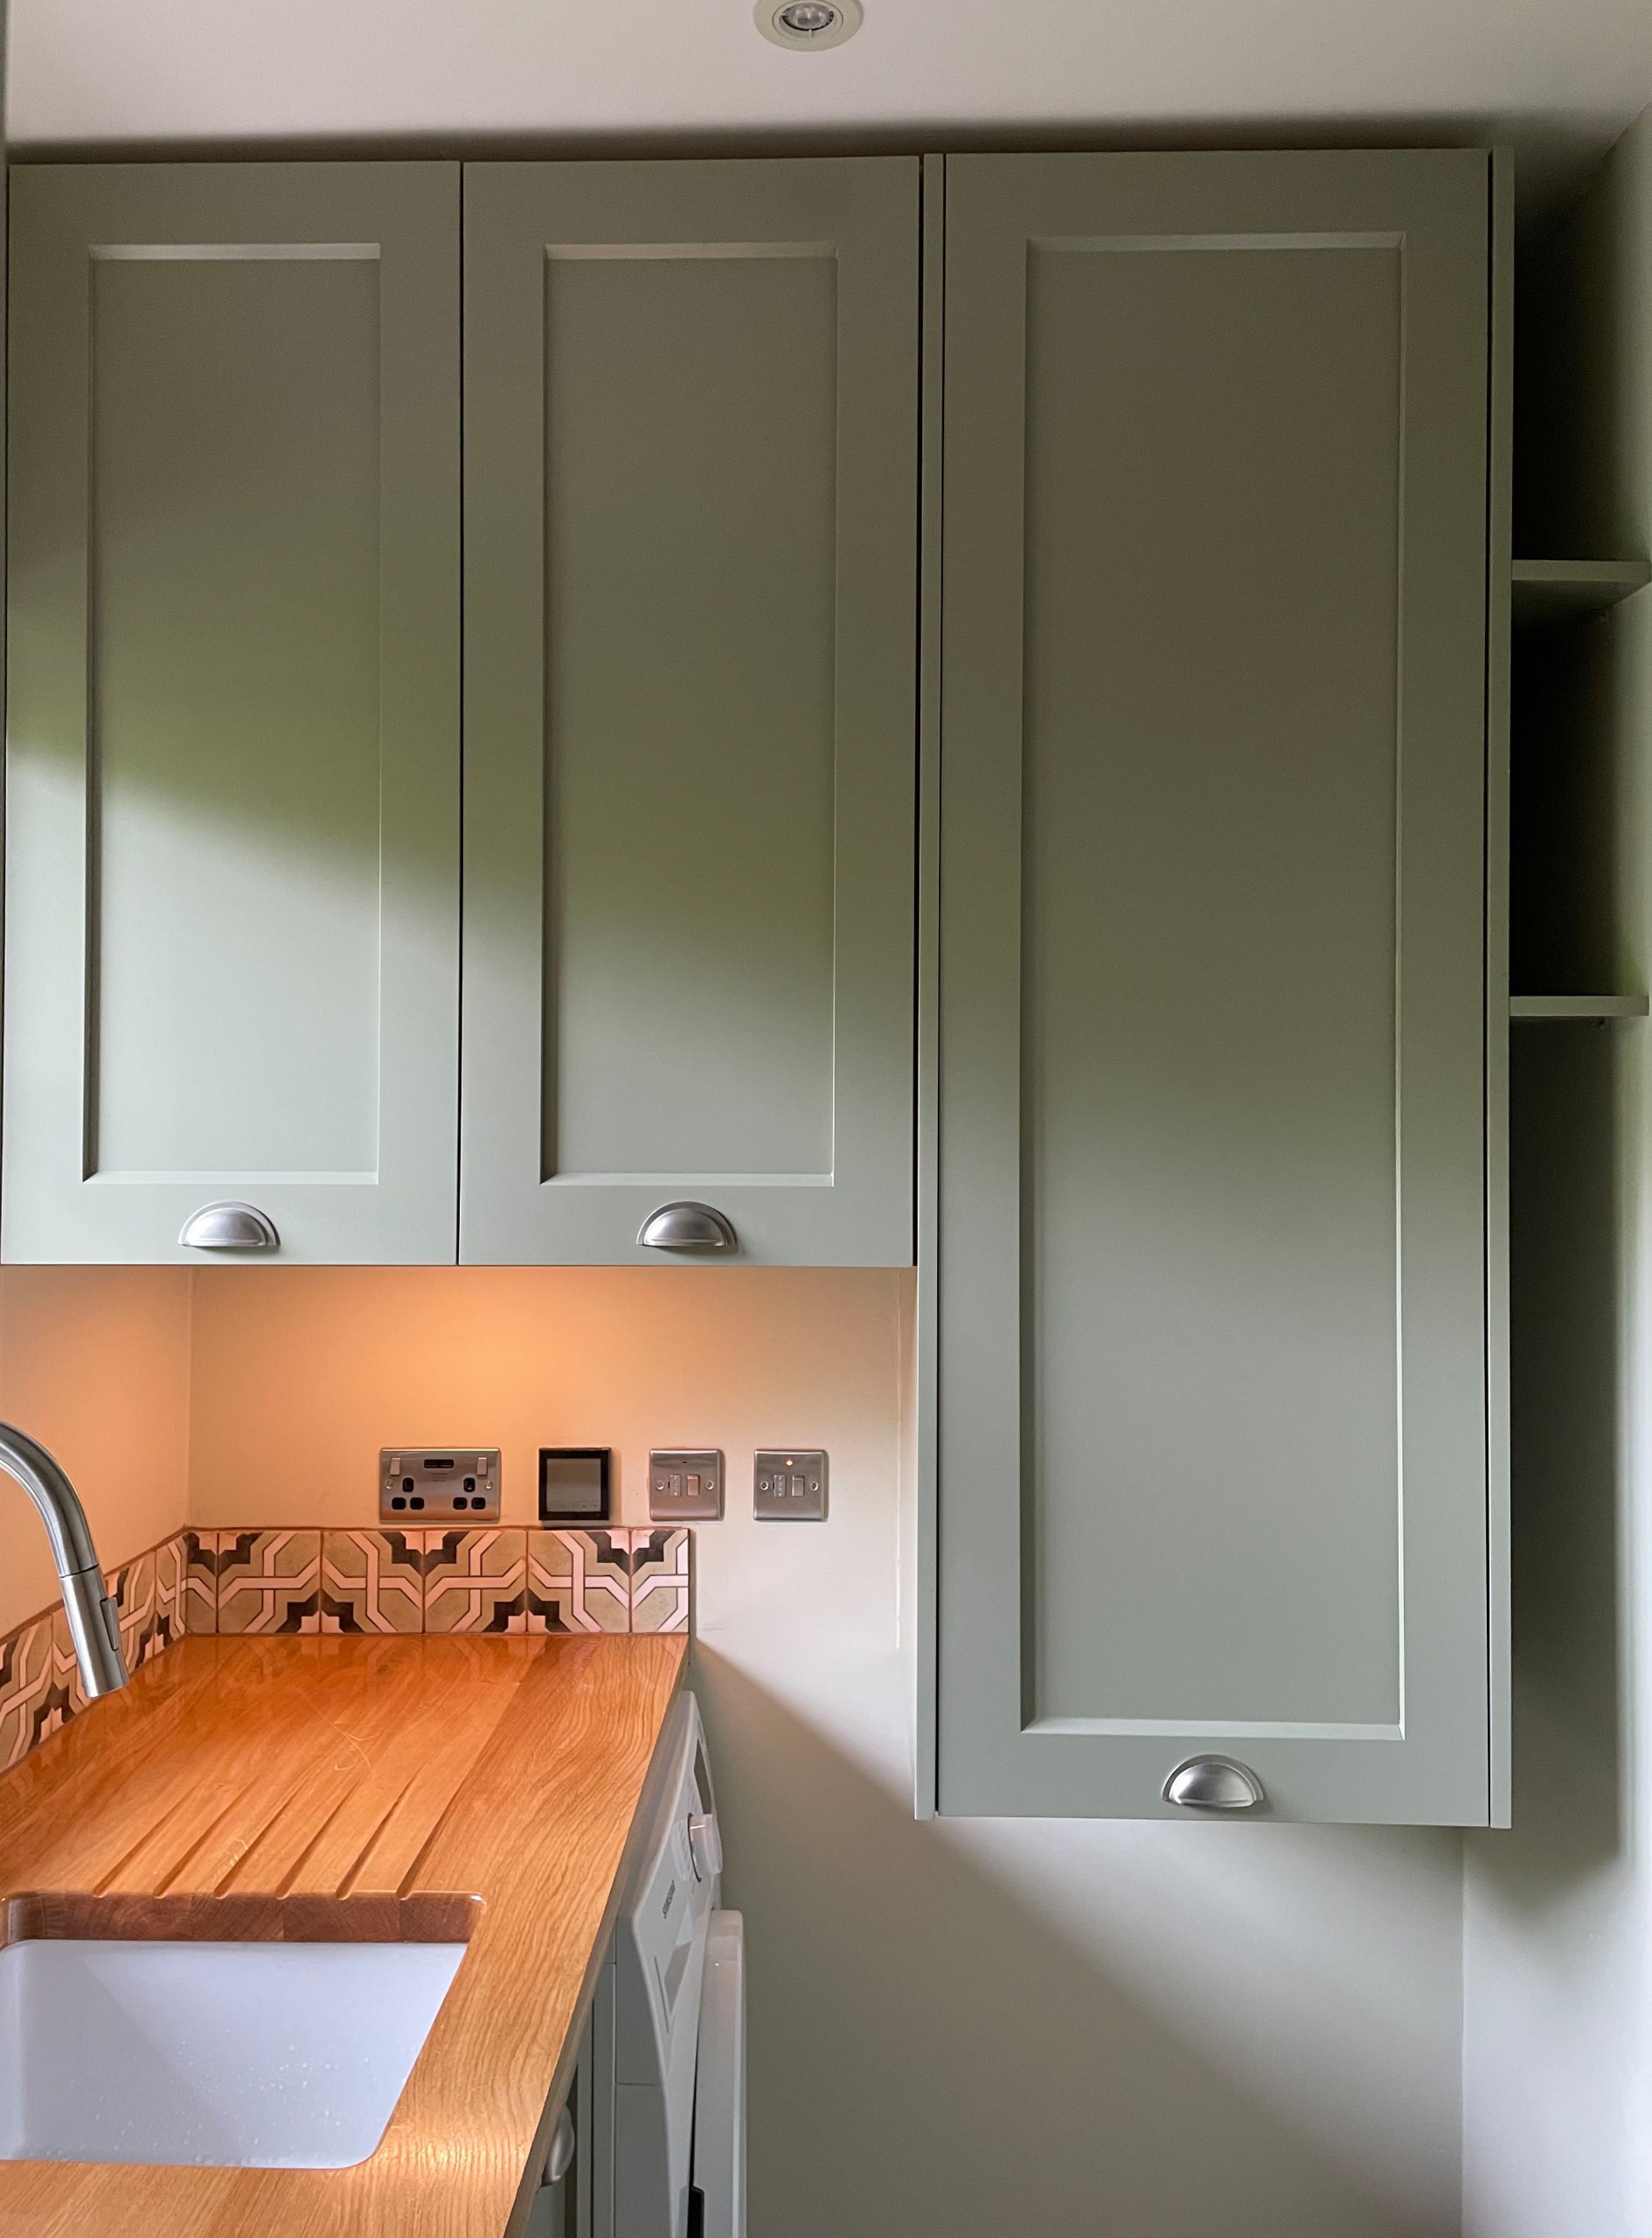 Bespoke cabinets for utility room